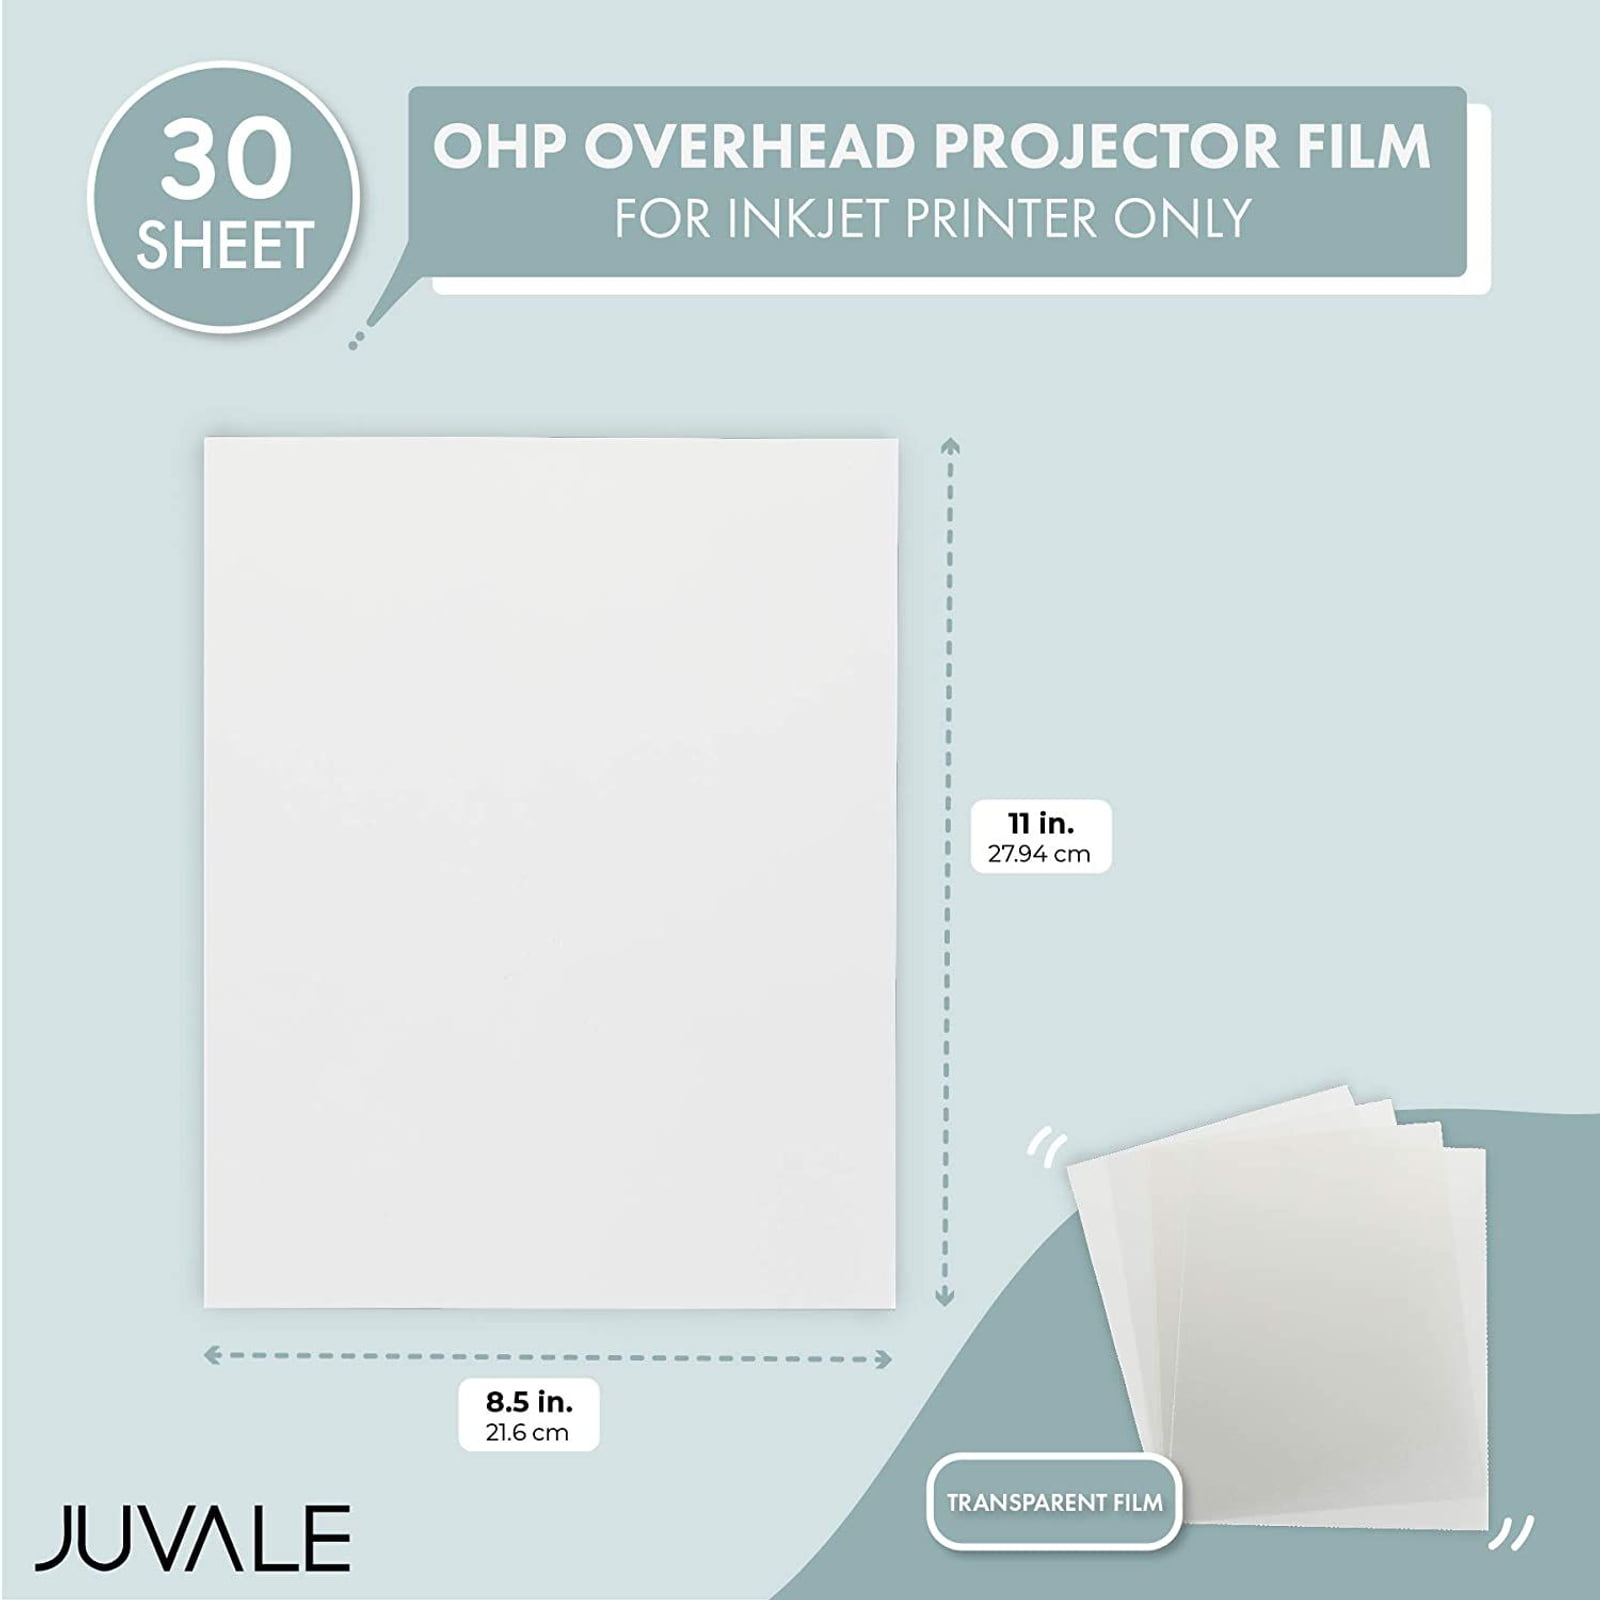 20Sheets A3 OHP Film Inkjet  Overhead Projector Clear Film with White Stripe Har 